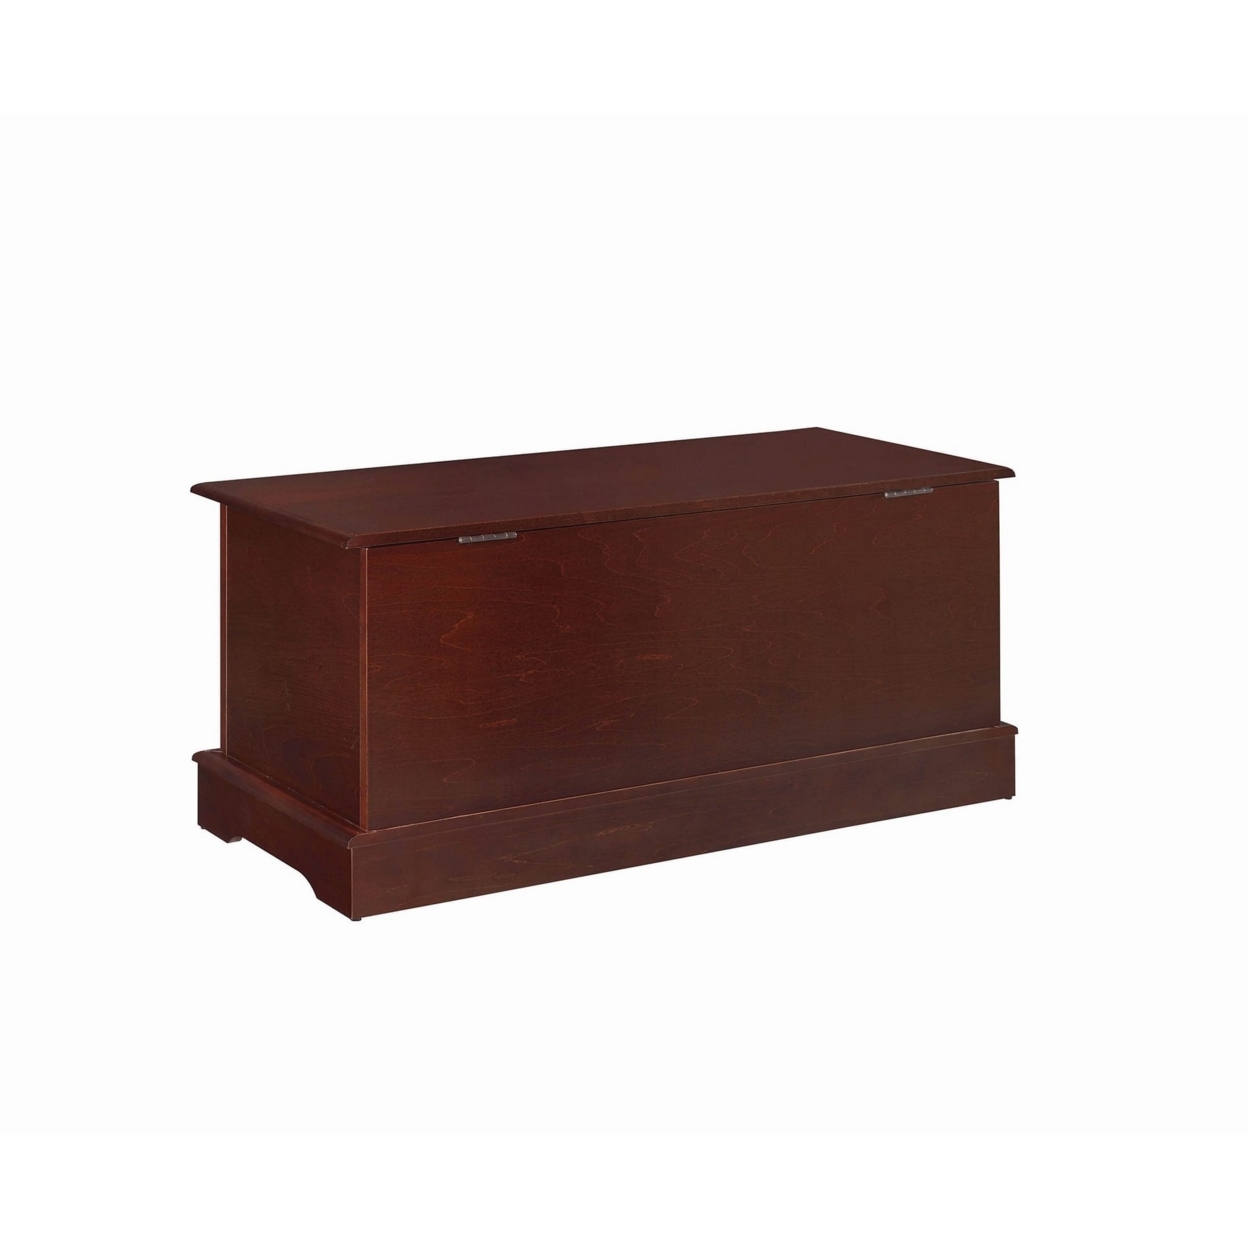 Traditional Style Lift Top Wooden Chest With Carved Details, Dark Brown- Saltoro Sherpi